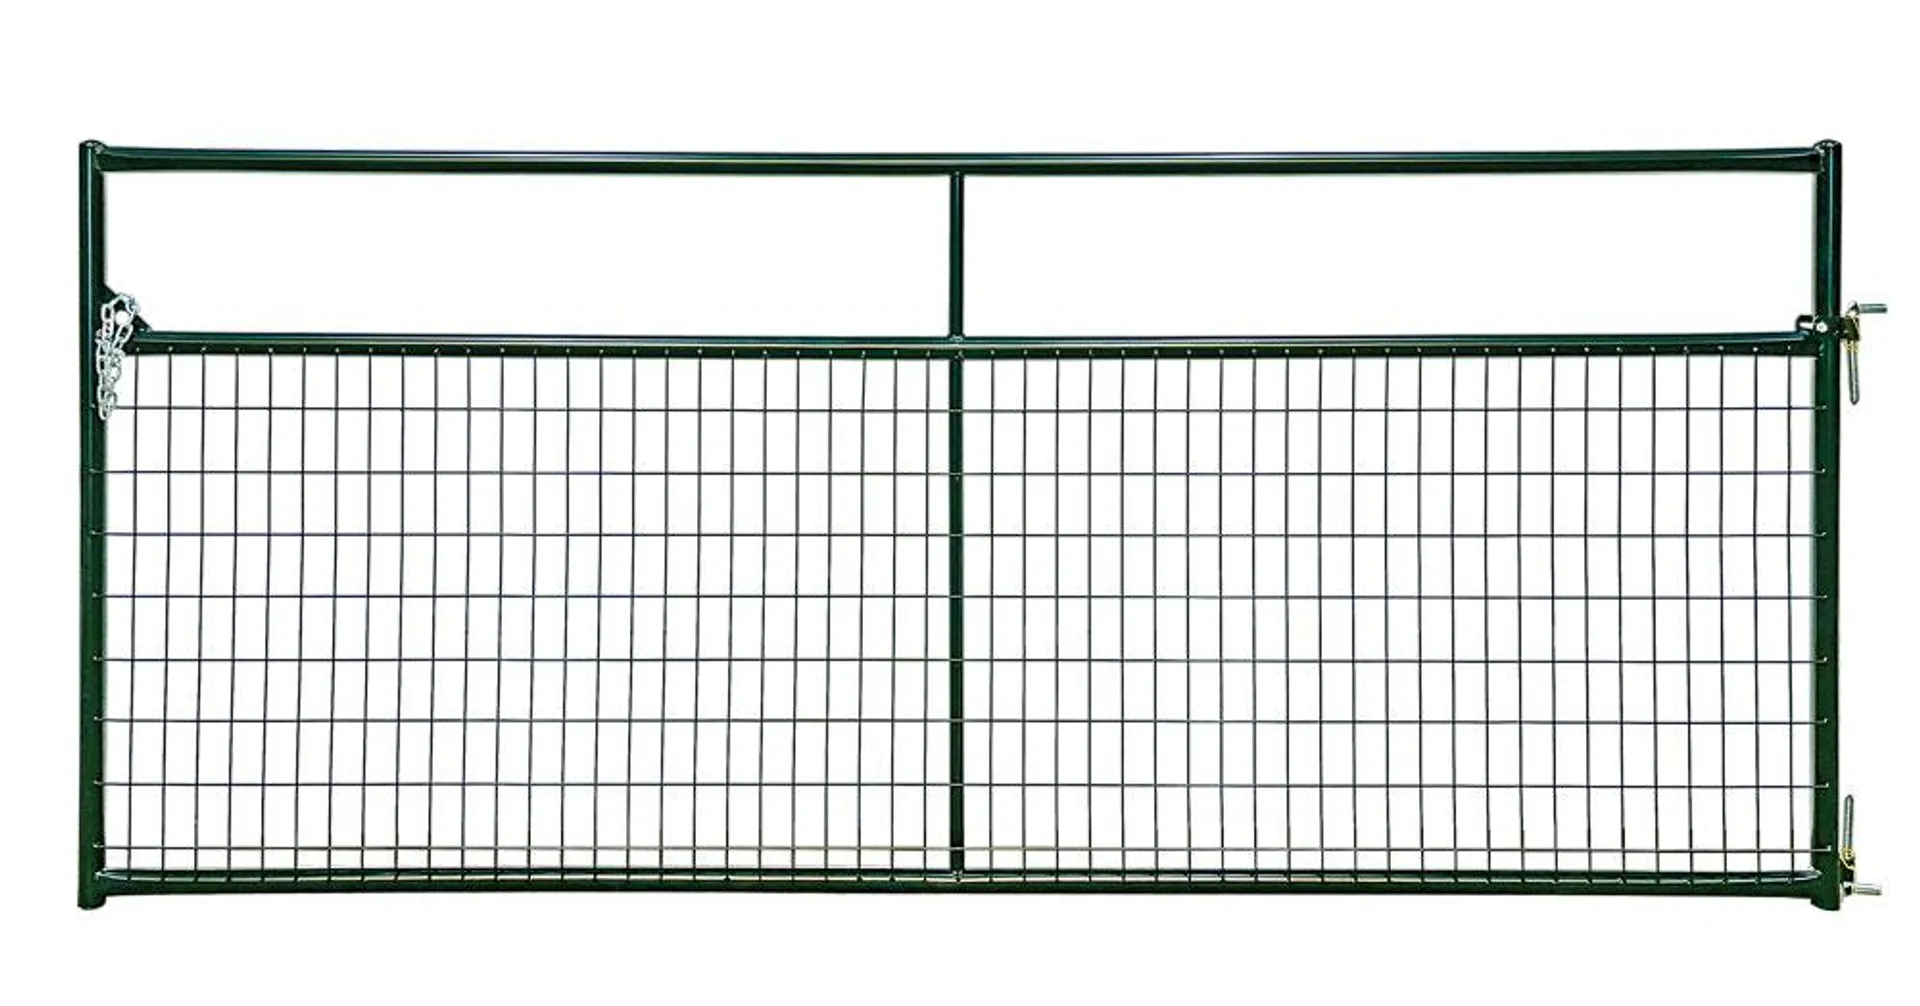 RWGG16 Wire-Filled Gate, 16 ft W Gate, 50-1/2 in H Gate, 20 ga Frame Tube/Channel, 8 ga Mesh Wire